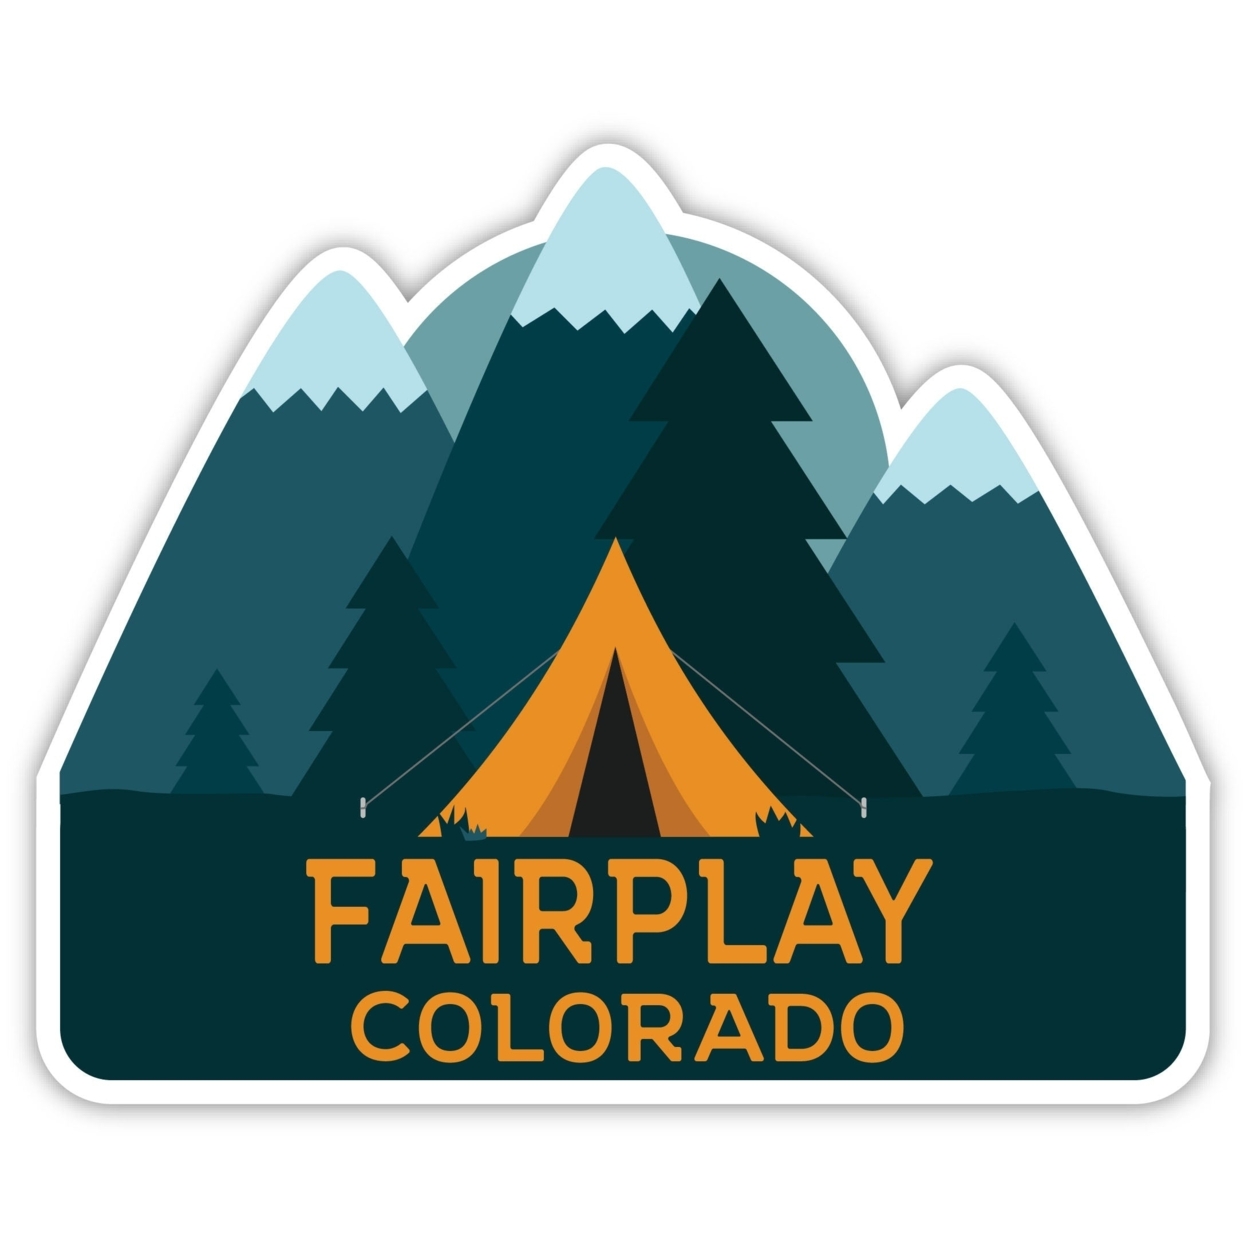 Fairplay Colorado Souvenir Decorative Stickers (Choose Theme And Size) - 4-Pack, 12-Inch, Adventures Awaits